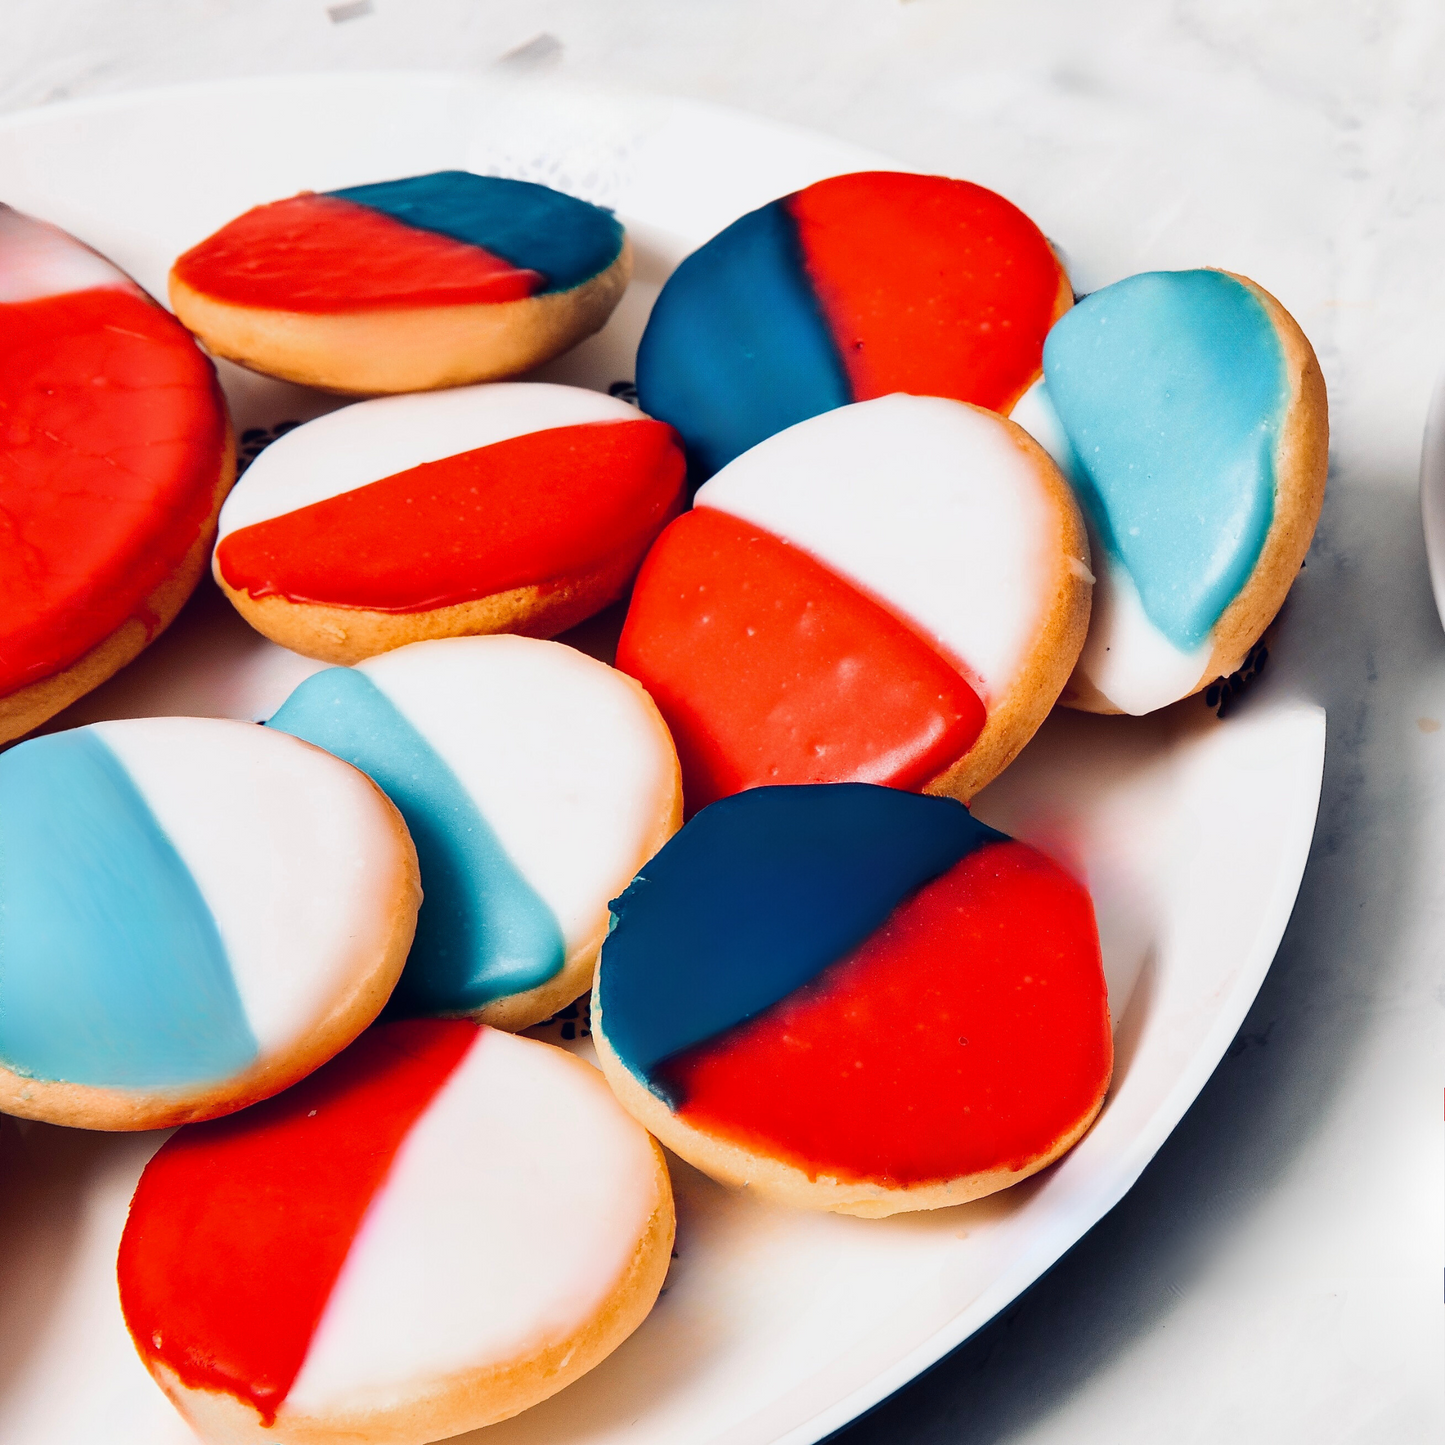 Red, white and blue cookies on a white plate.